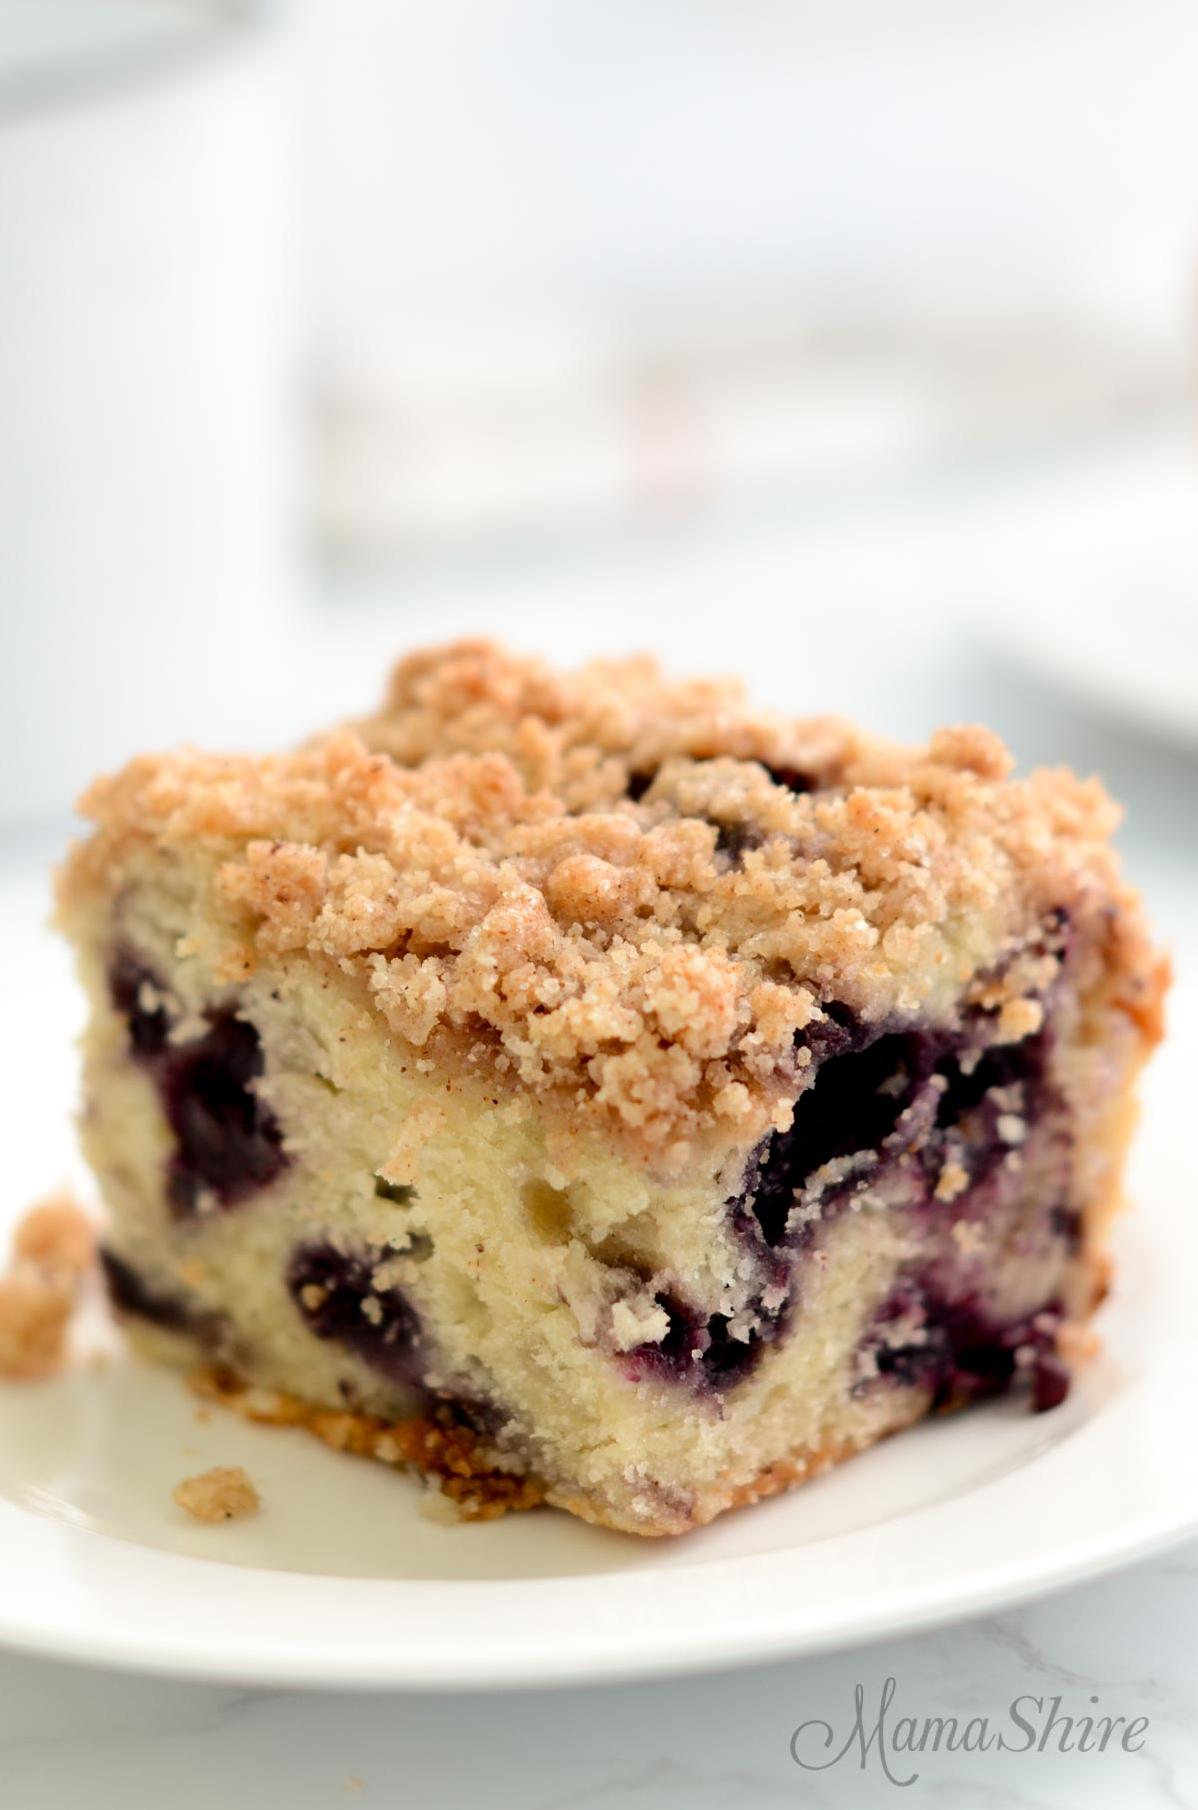  This coffee cake is easy to make and even easier to eat!